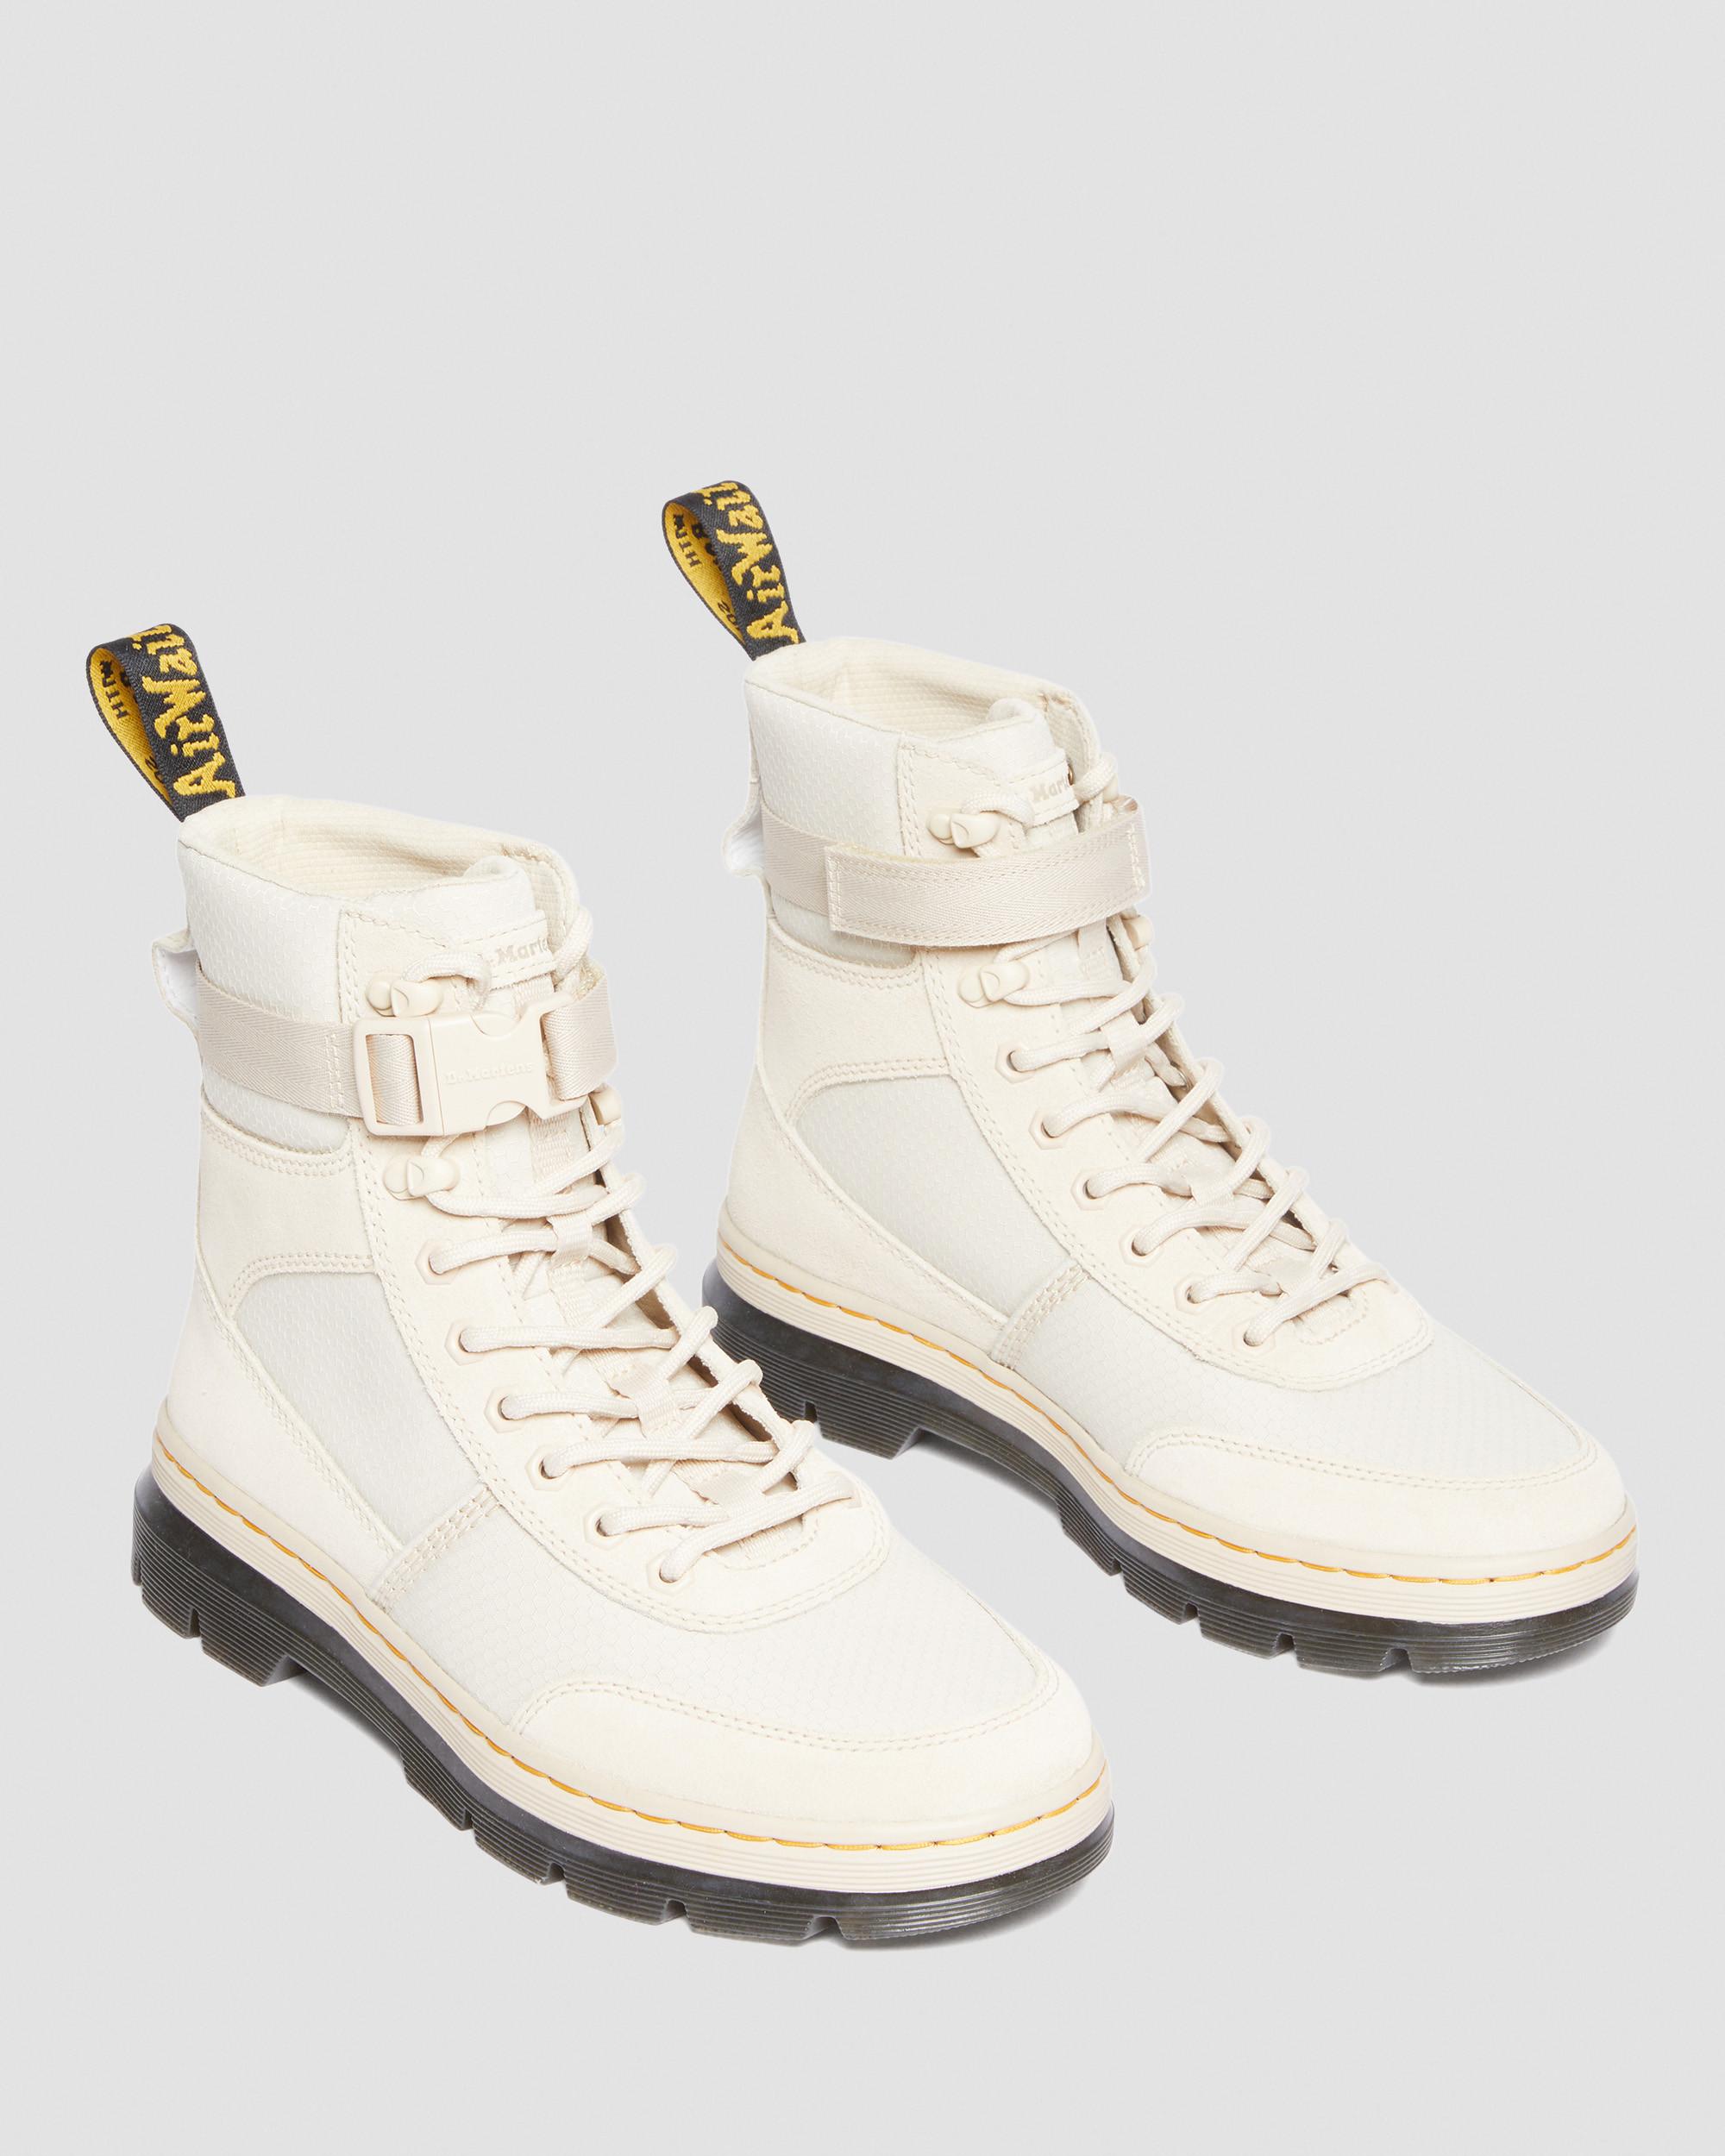 Combs Tech Suede & Nylon Utility Boots in Parchment Beige | Dr. Martens